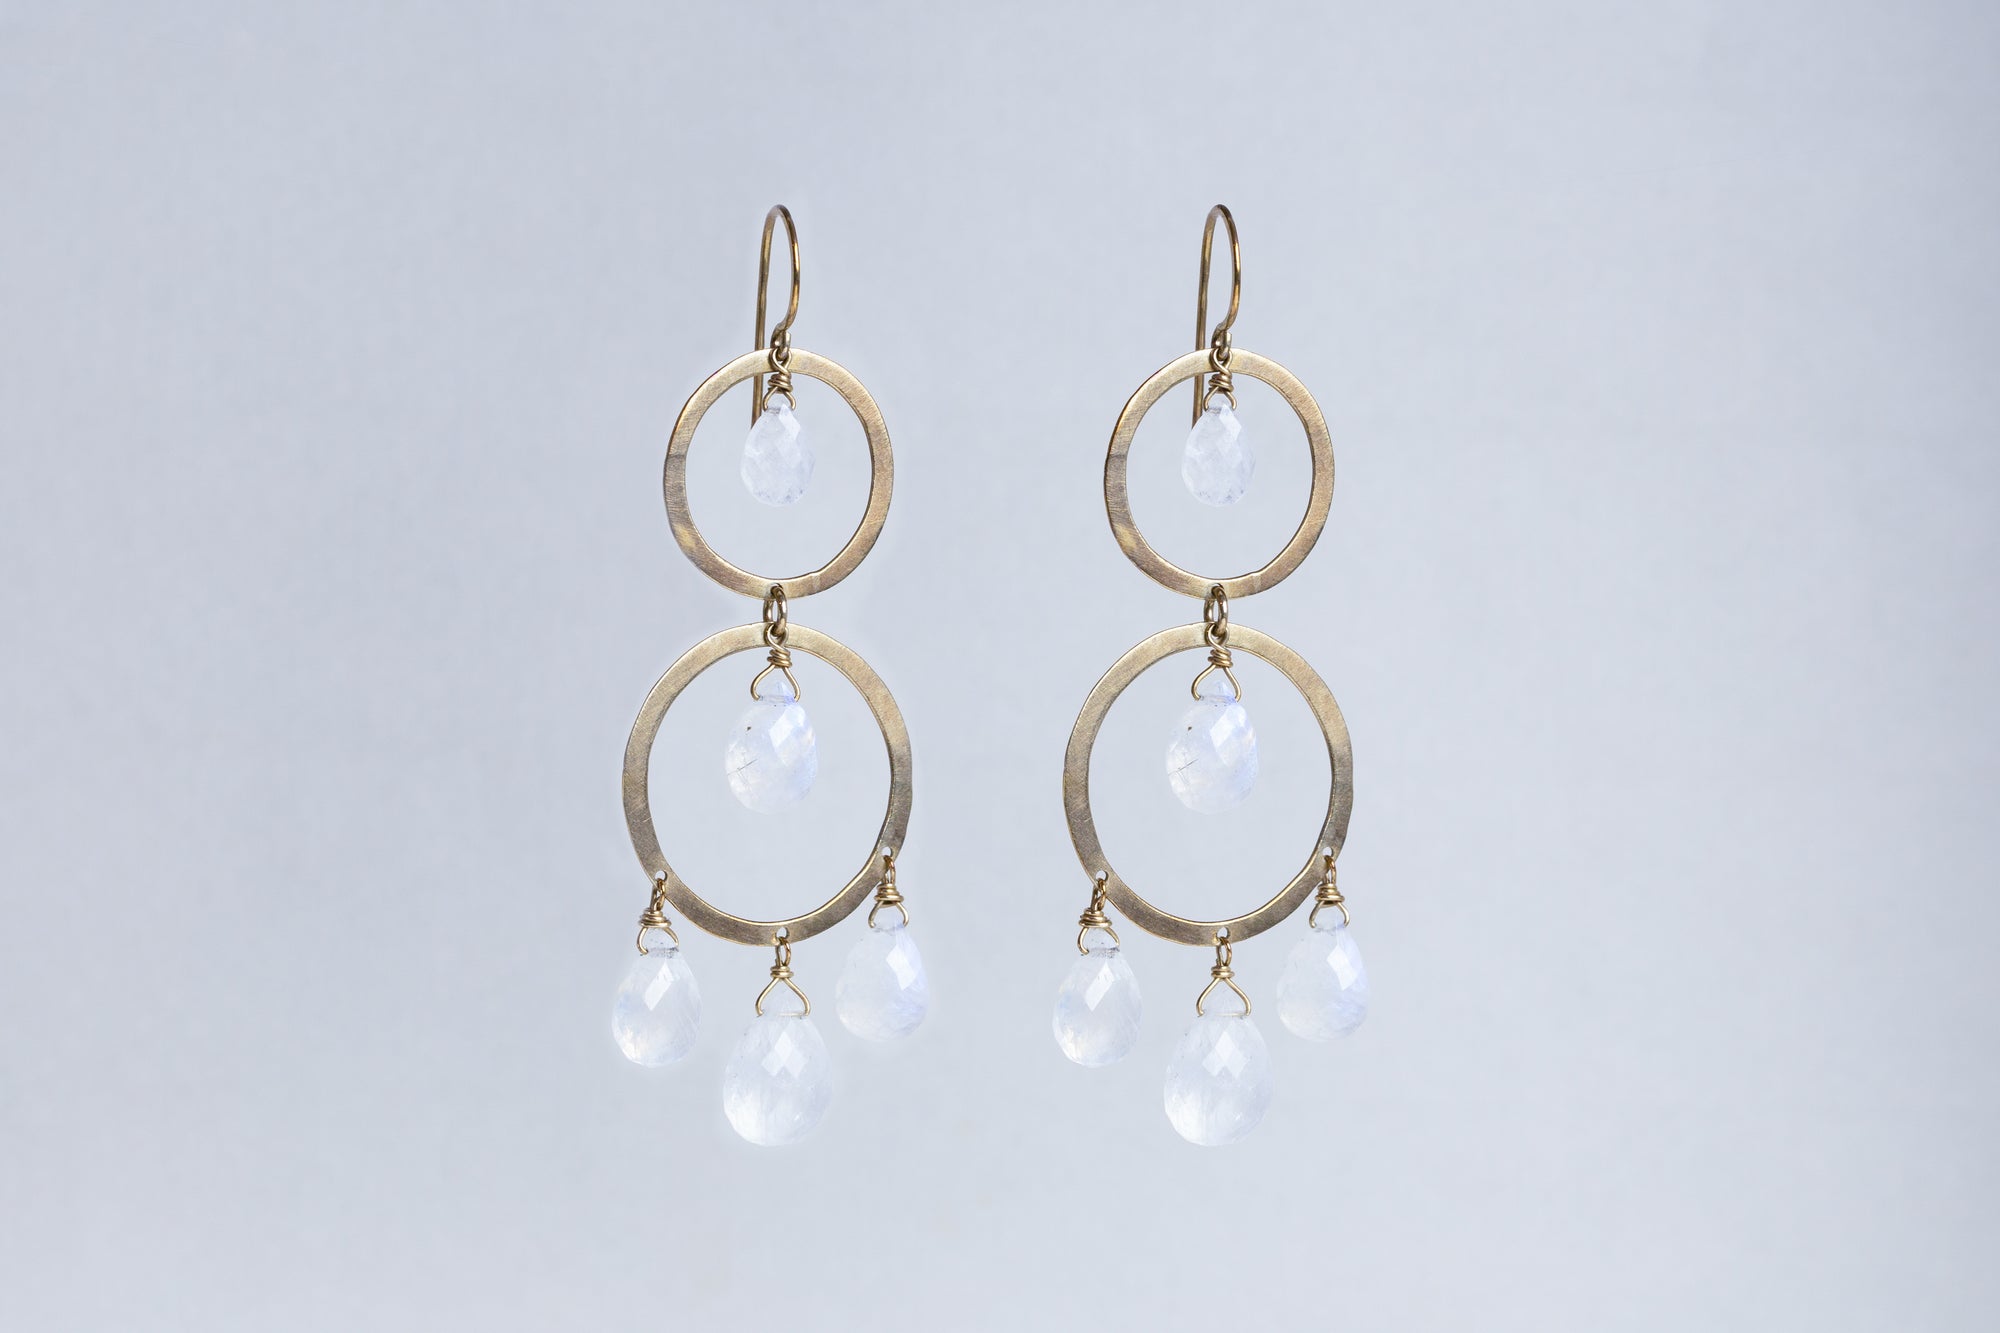 Gold Circle Drop Earrings with Moonstones